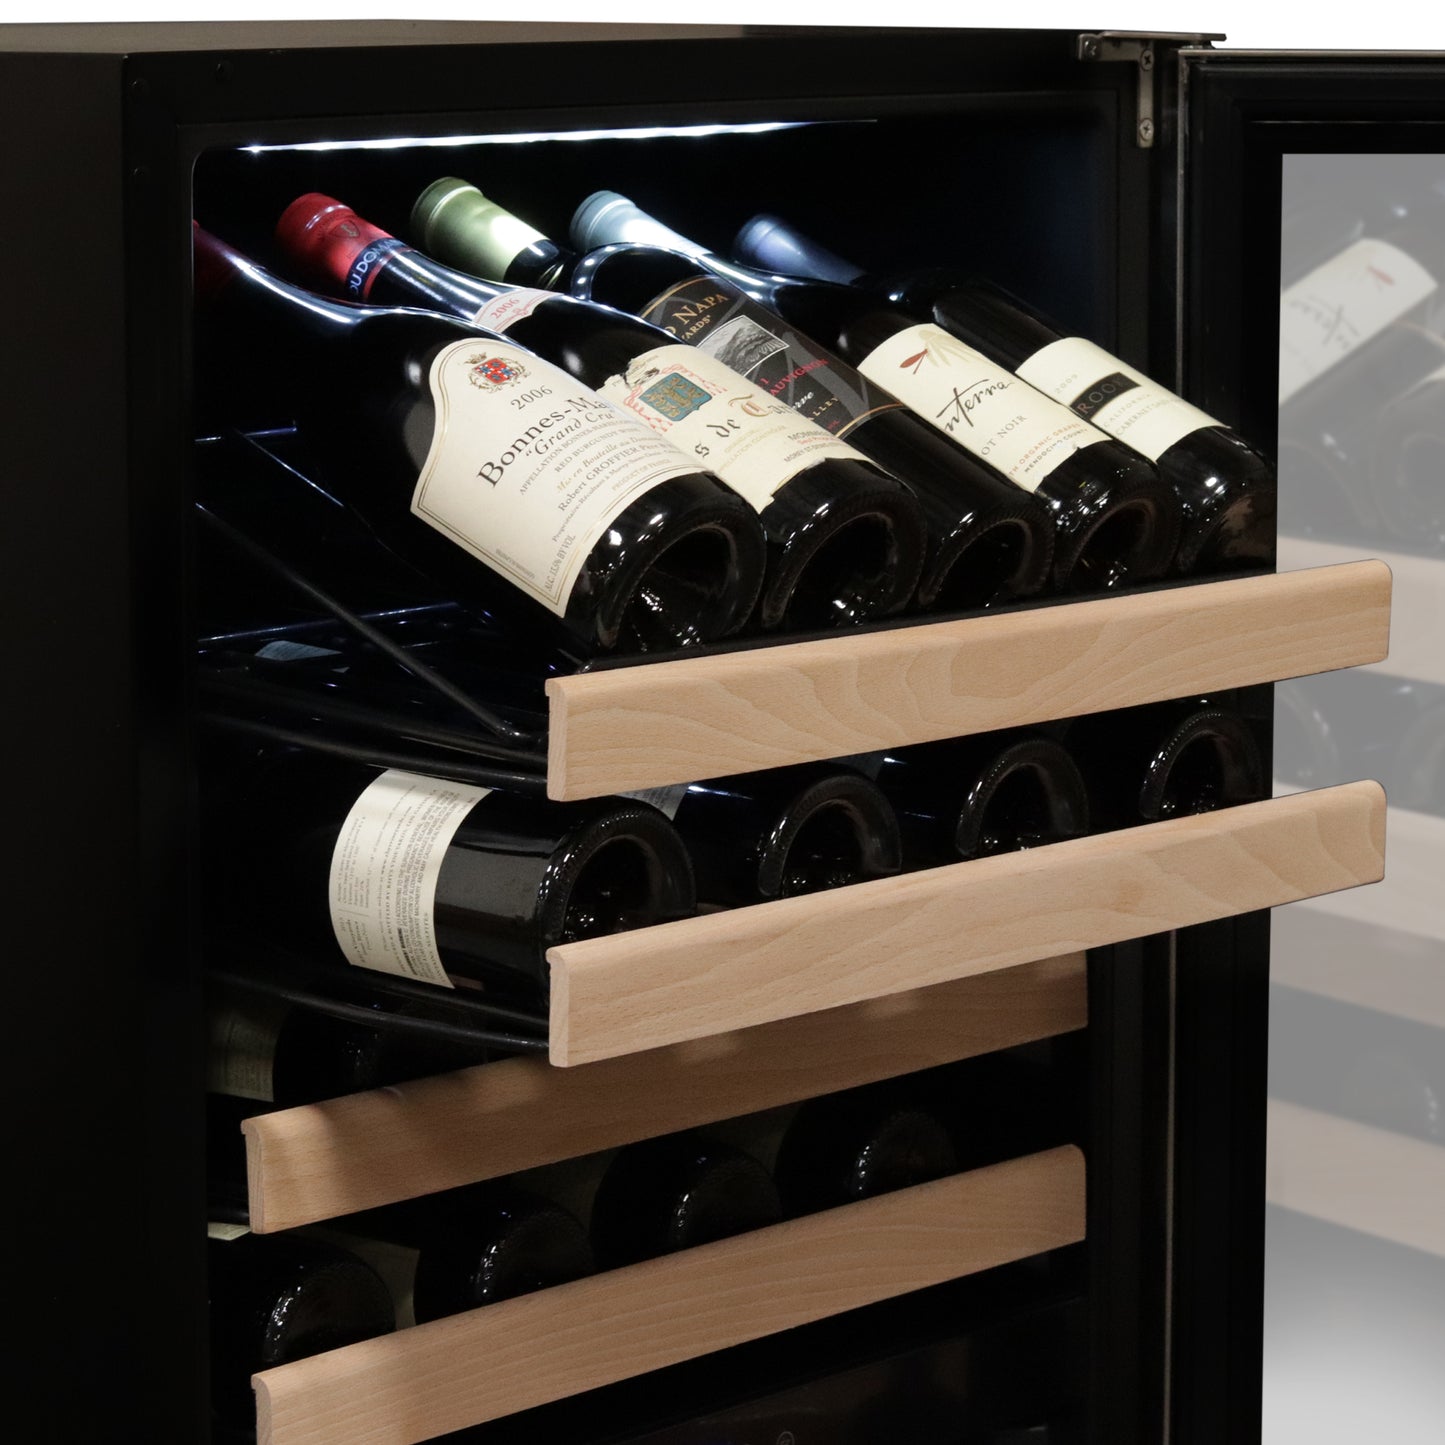 A wine cellar with bottles of wine displayed in the Whynter 164 Bottle Built-in Stainless Steel Dual Zone Compressor Wine Refrigerator.